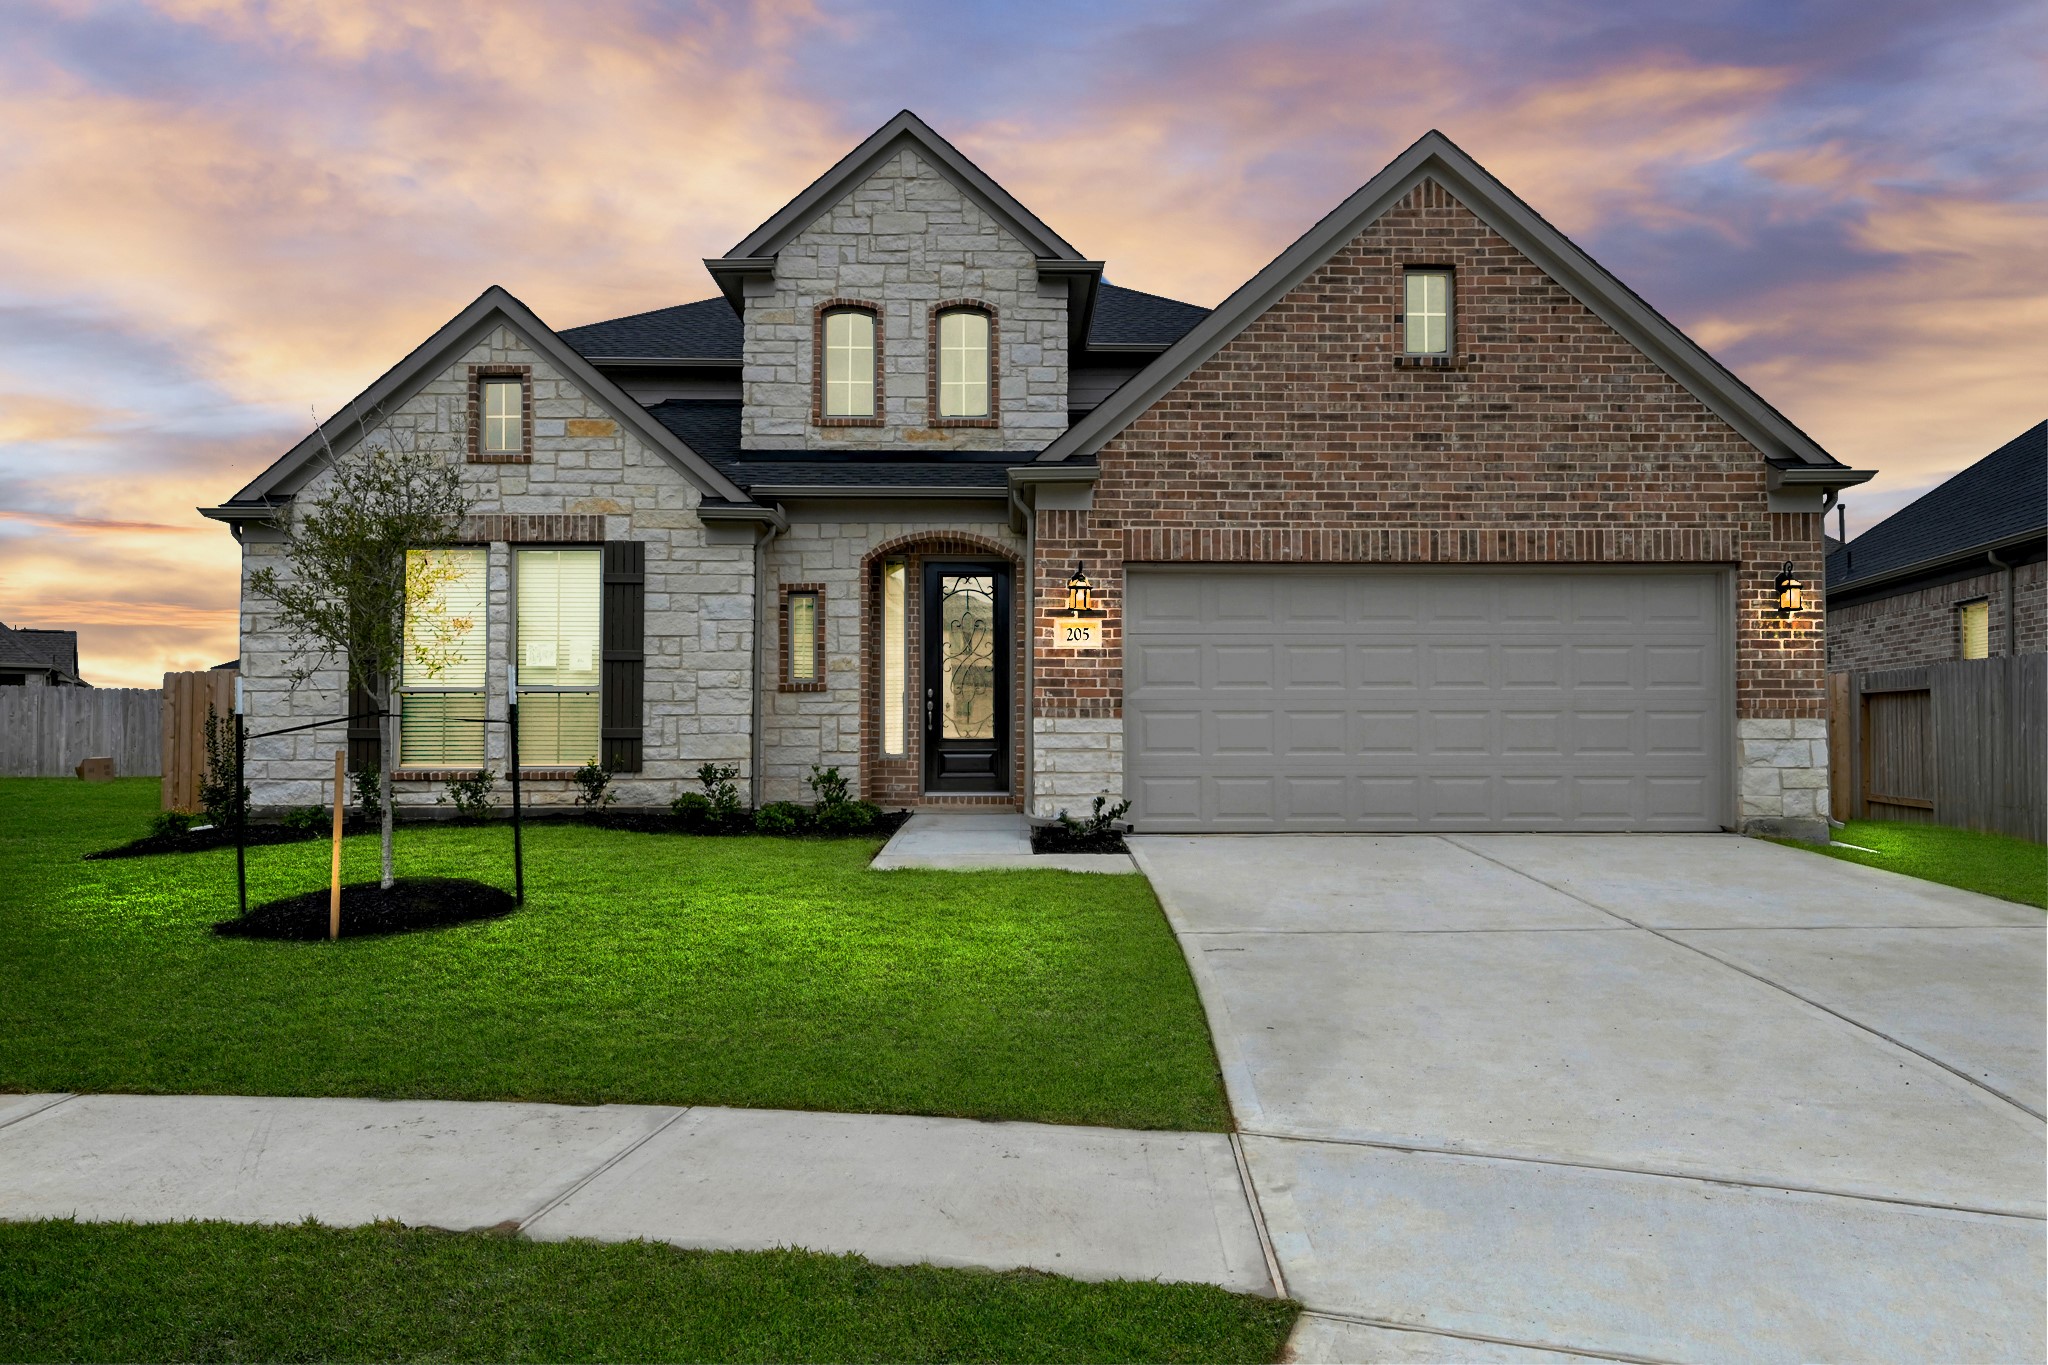 Welcome home to 205 Bright Bluff Circle located in the community of Beacon Hill and zoned to Waller ISD.